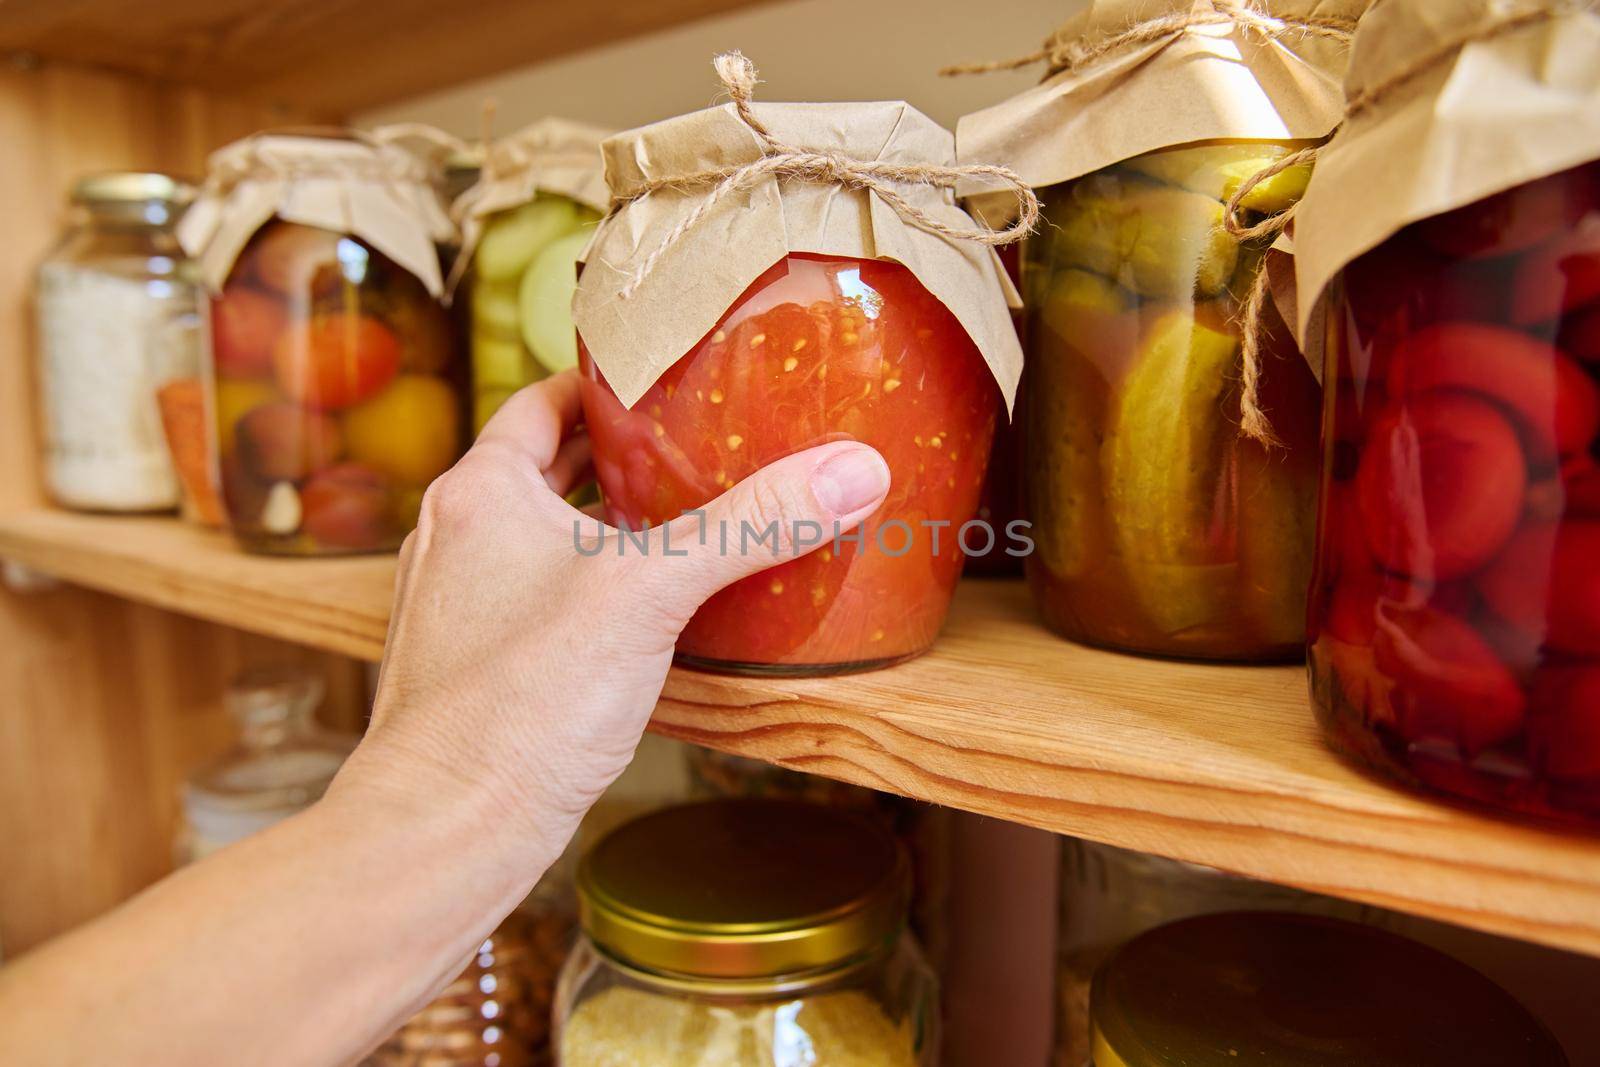 Storage of food in the kitchen in pantry. Pickled canned vegetables and fruits on the shelf, jar of tomatoes close-up. Cooking at home, homemade preservation, household